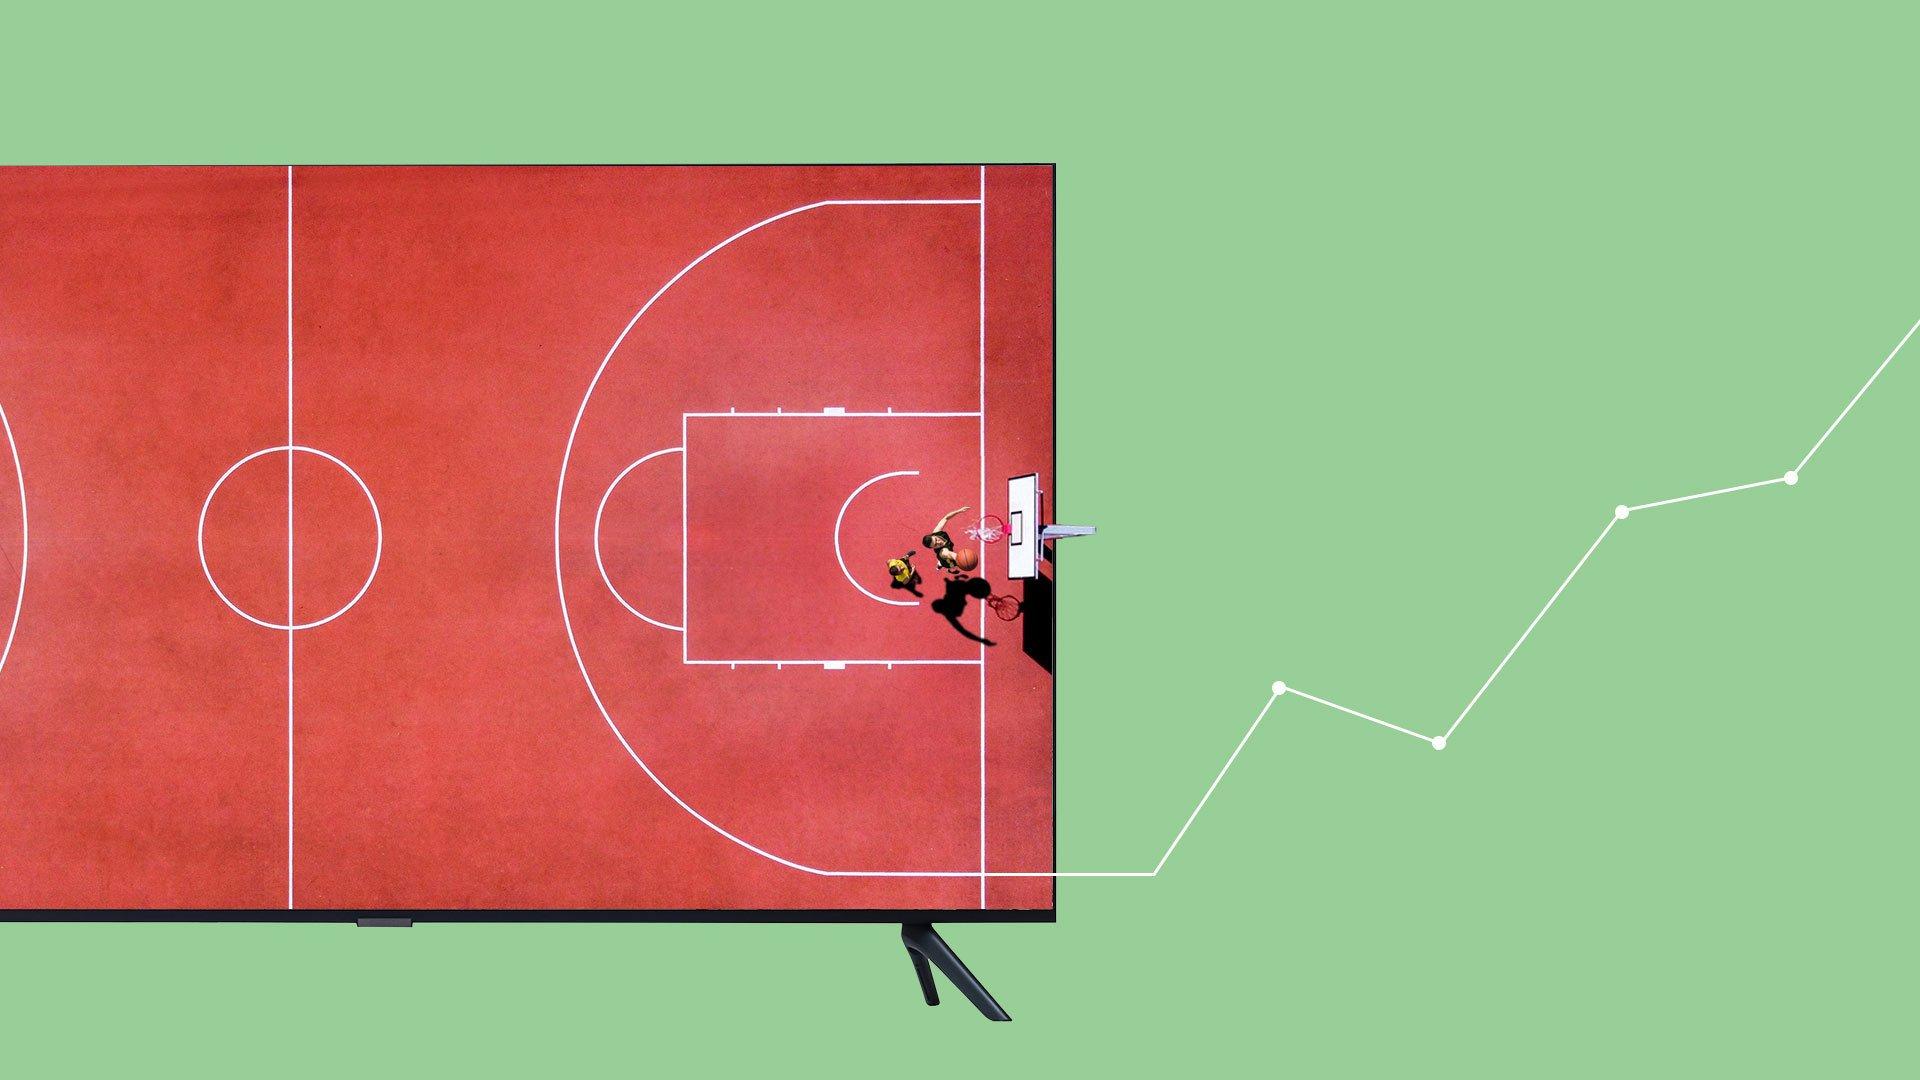 Two basketball players on a court with an illustration of a line graph coming off the court